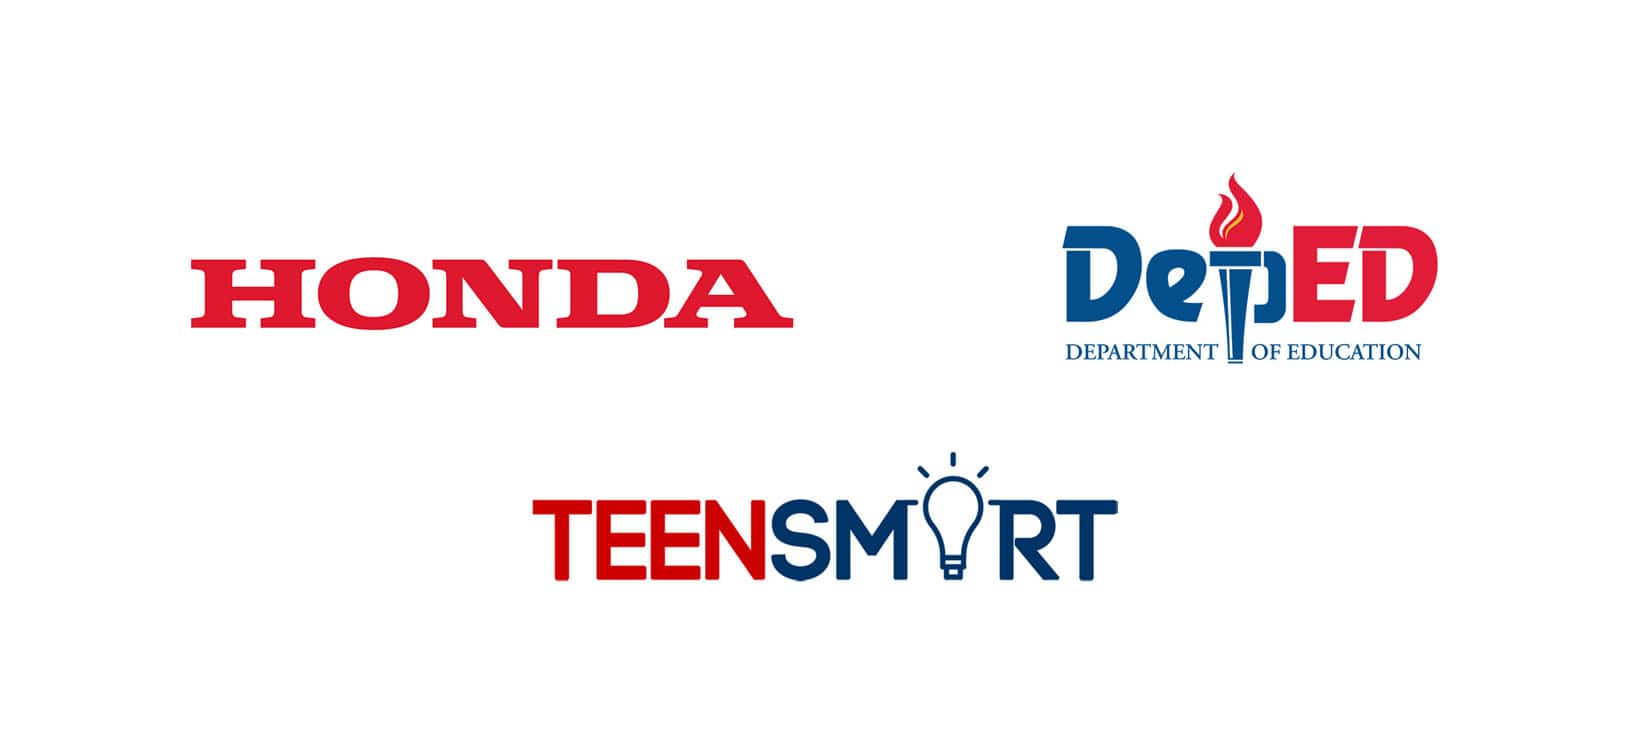 Honda continues its road safety advocacy through â€œTeen Smartâ€ program